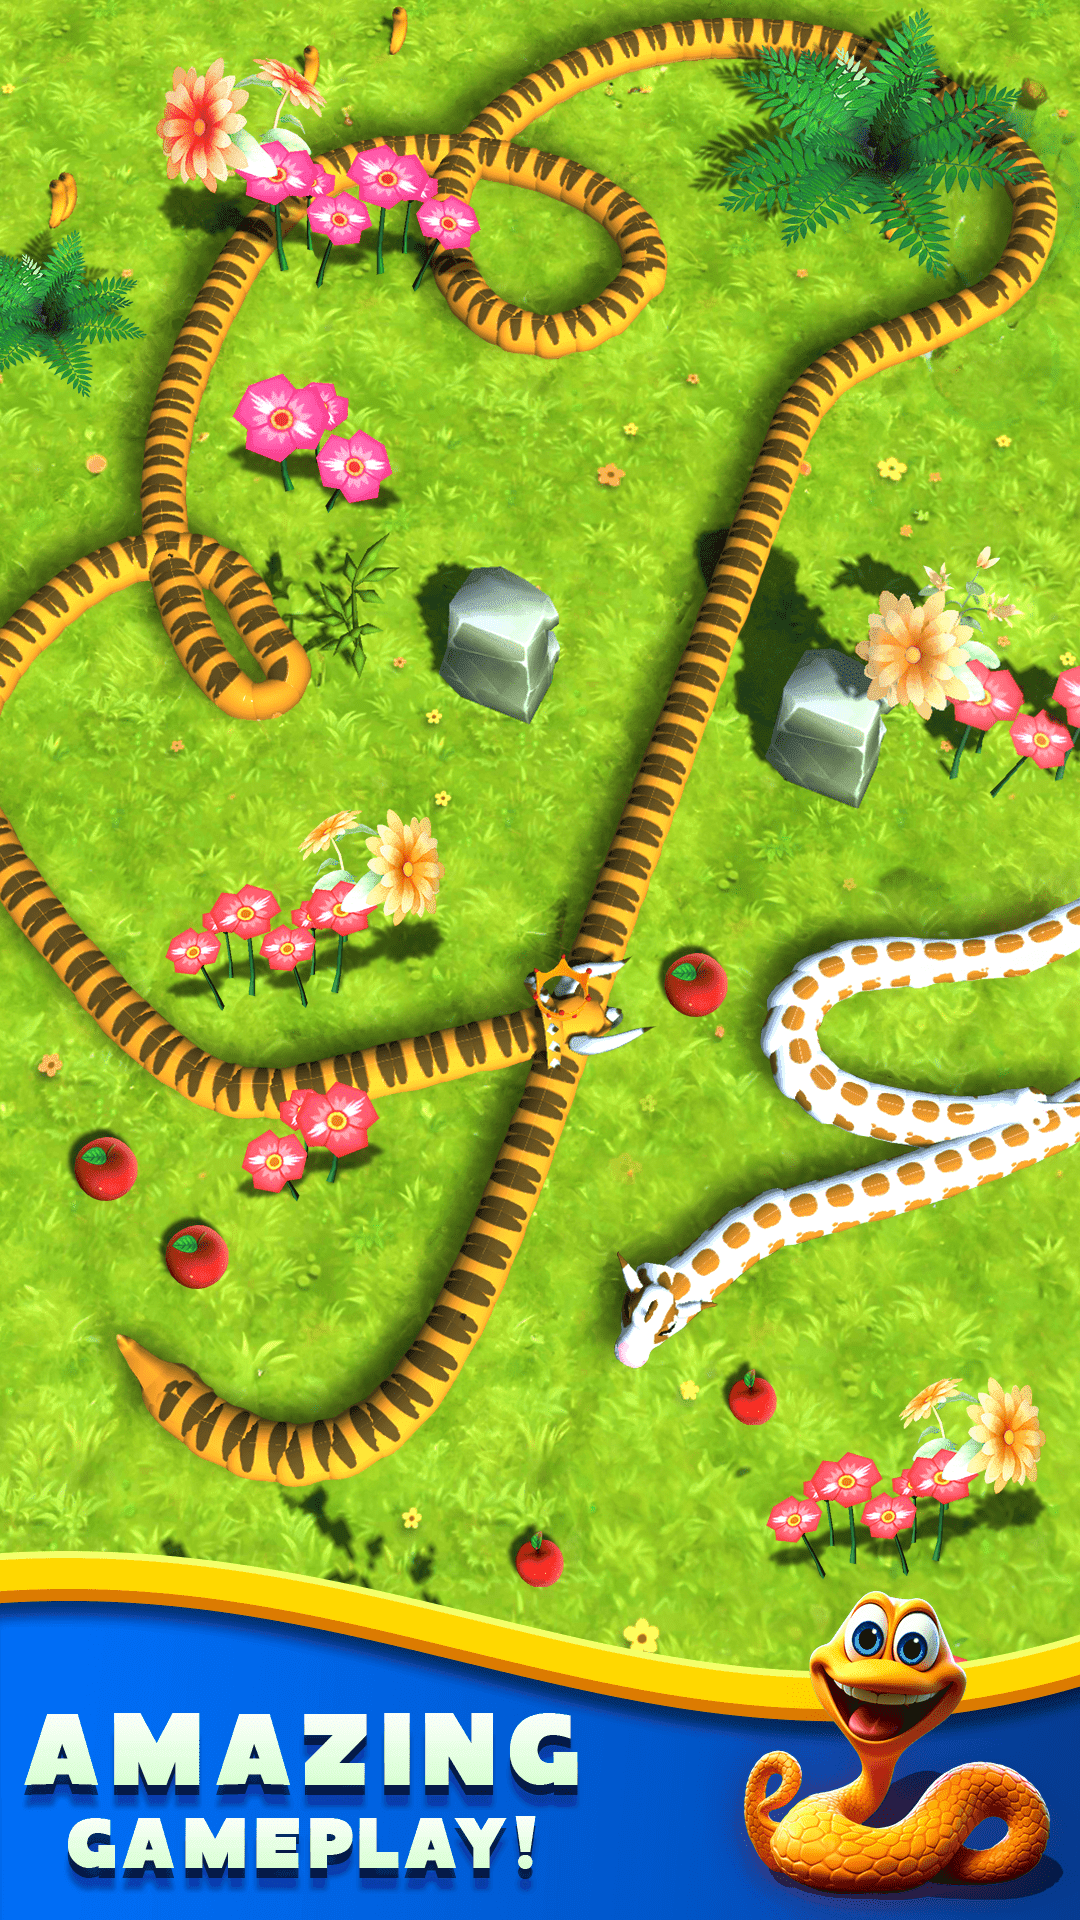 Slink.io - Snake Game APK + Mod for Android.